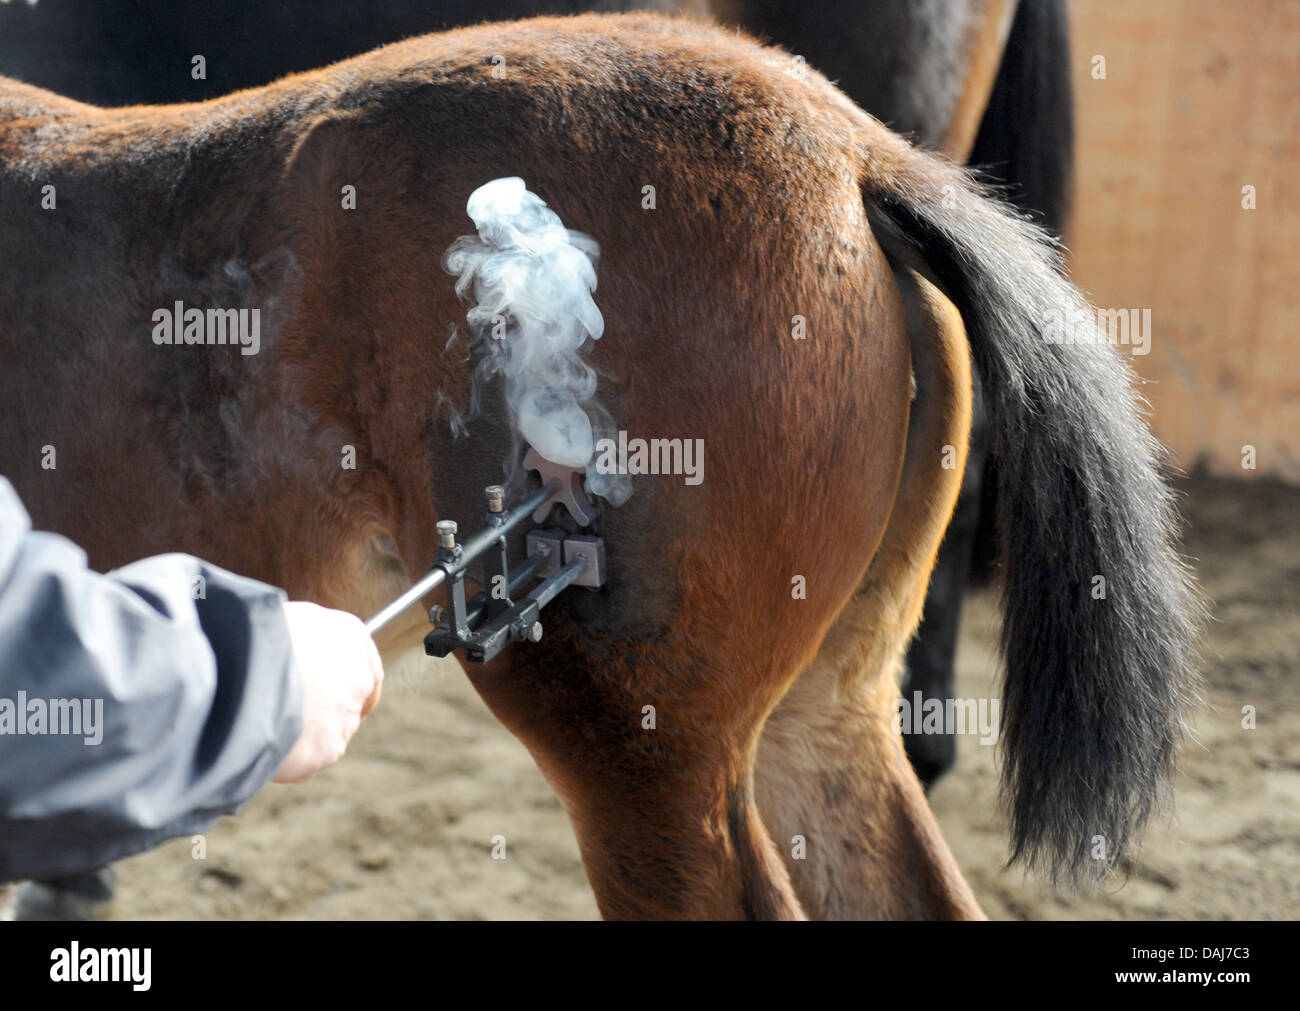 A foal's thigh is branded in Berlin, Germany, 21 March 2011. German Council asked the federal government to provide a bill banning thigh brandings. Photo: Joerg Carstensen Stock Photo